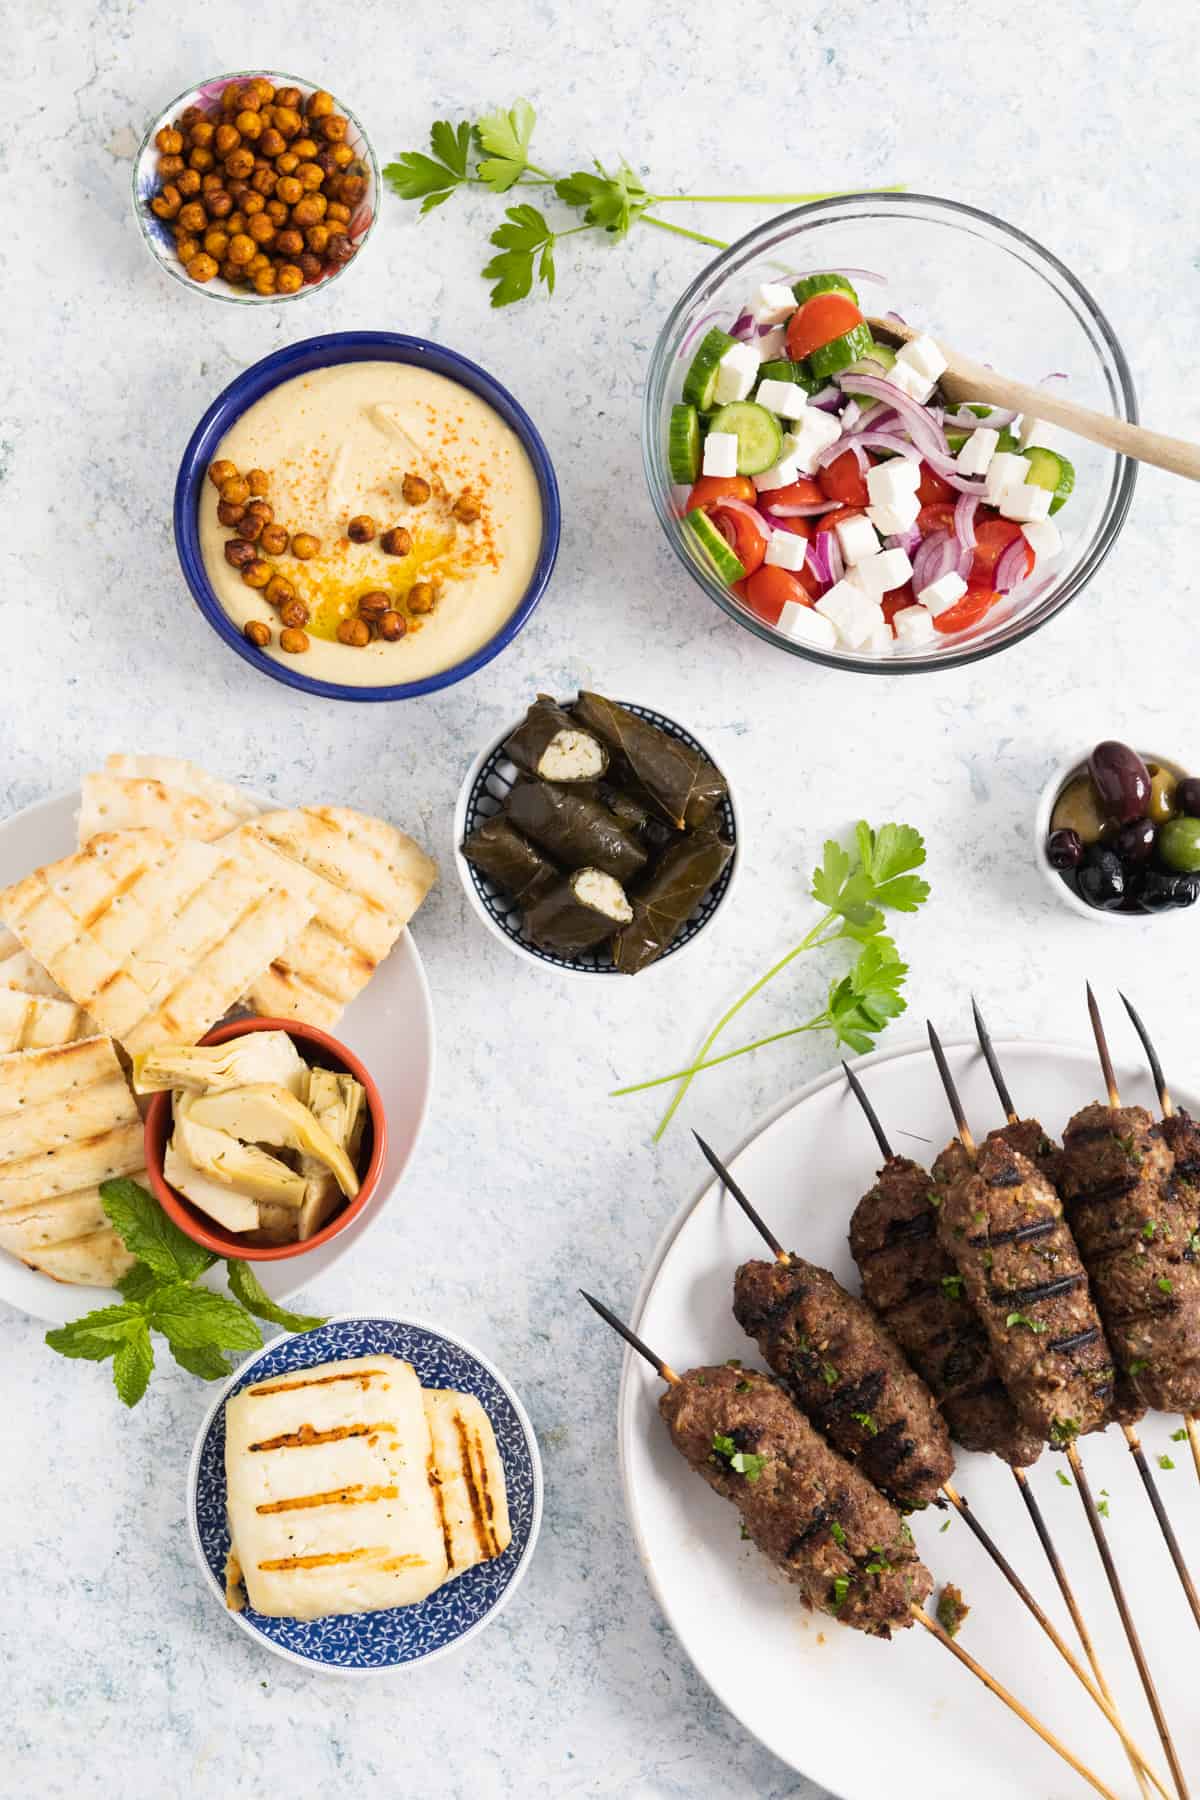 Ingredients and dishes to make a Mezze platter